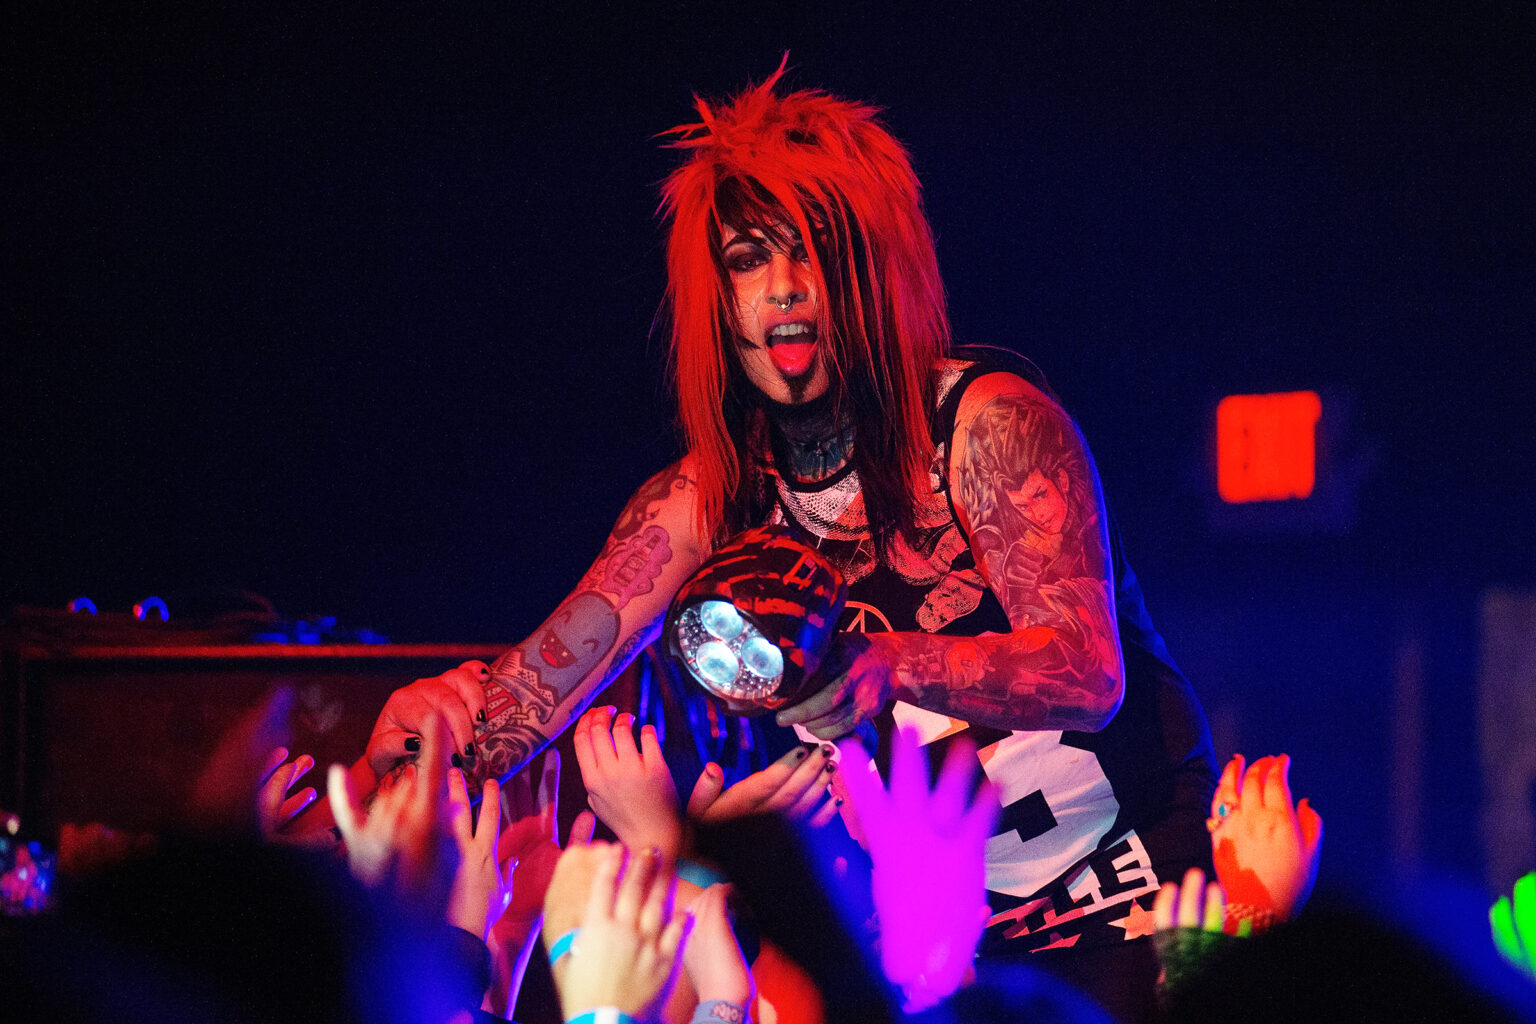 Dahvie Vanity, lead singer for the colorful, spiky-haired band Blood on the Dance Floor, is under investigation. Here's everything we know.